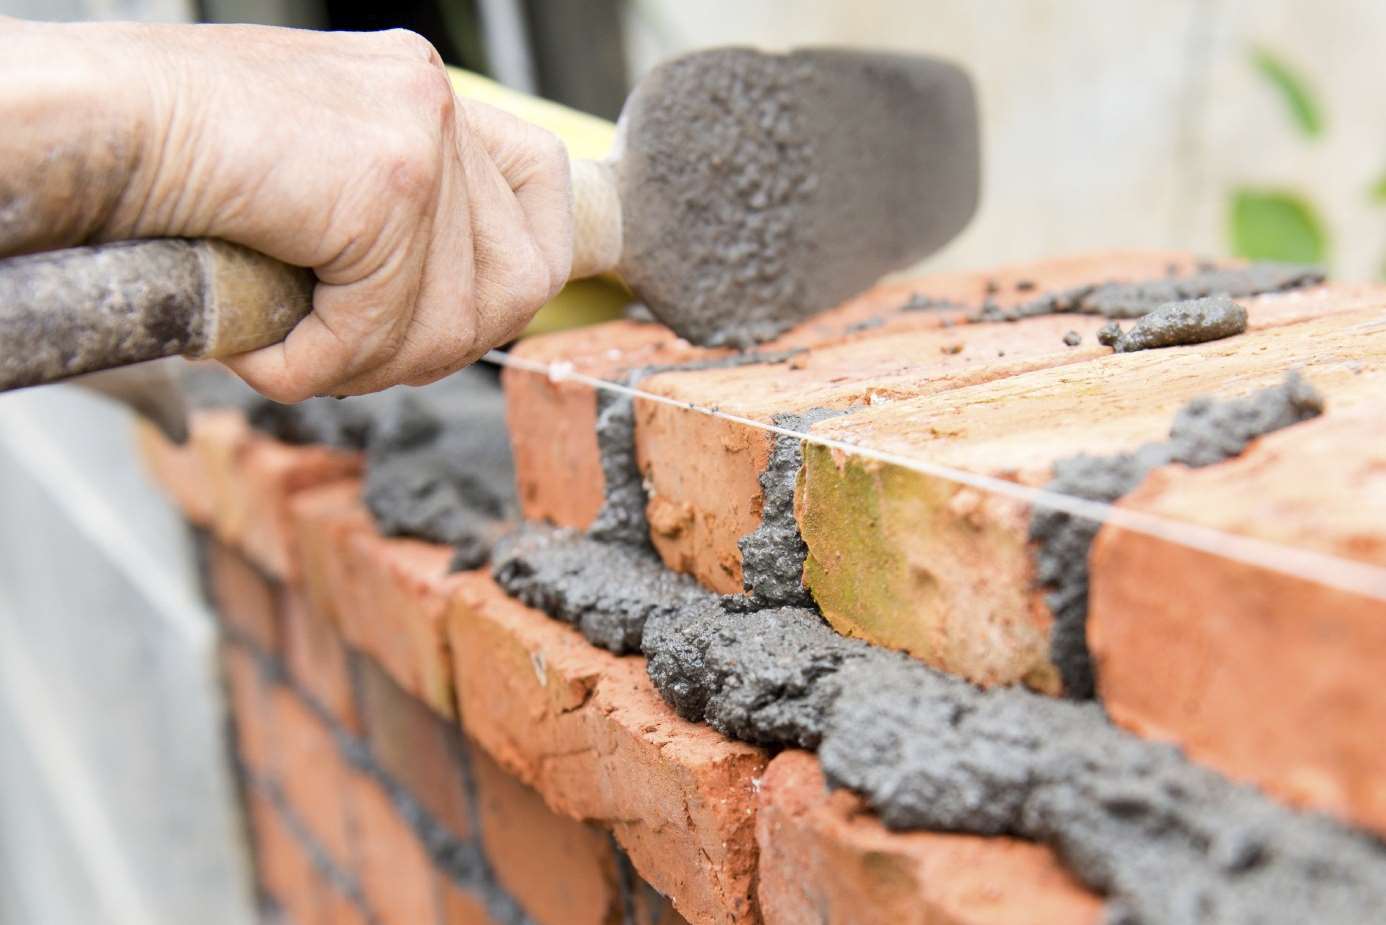 Rural campaigners want the government to fine developers which sit on land without building homes. Picture: iStock.com